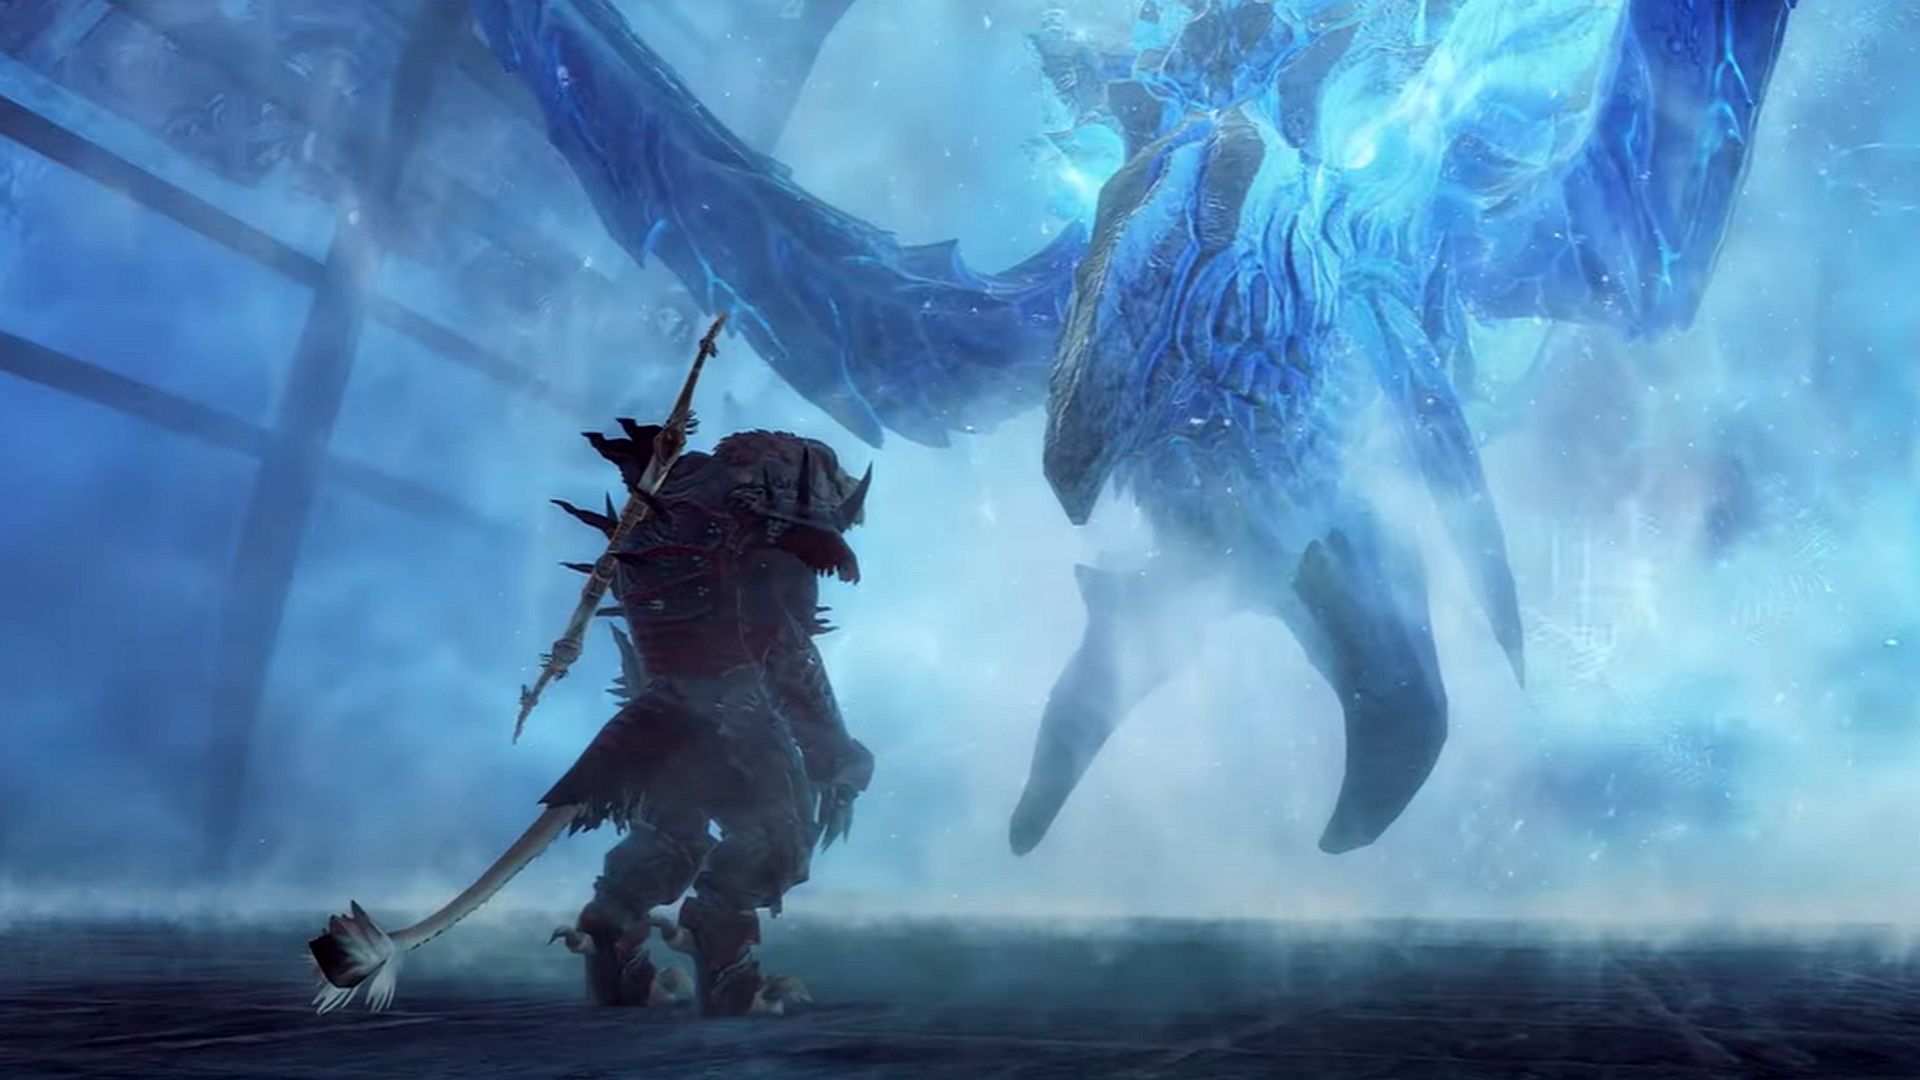 Guild Wars 2's Icebrood Saga finale showdown “really ups the stakes and the  chaos”